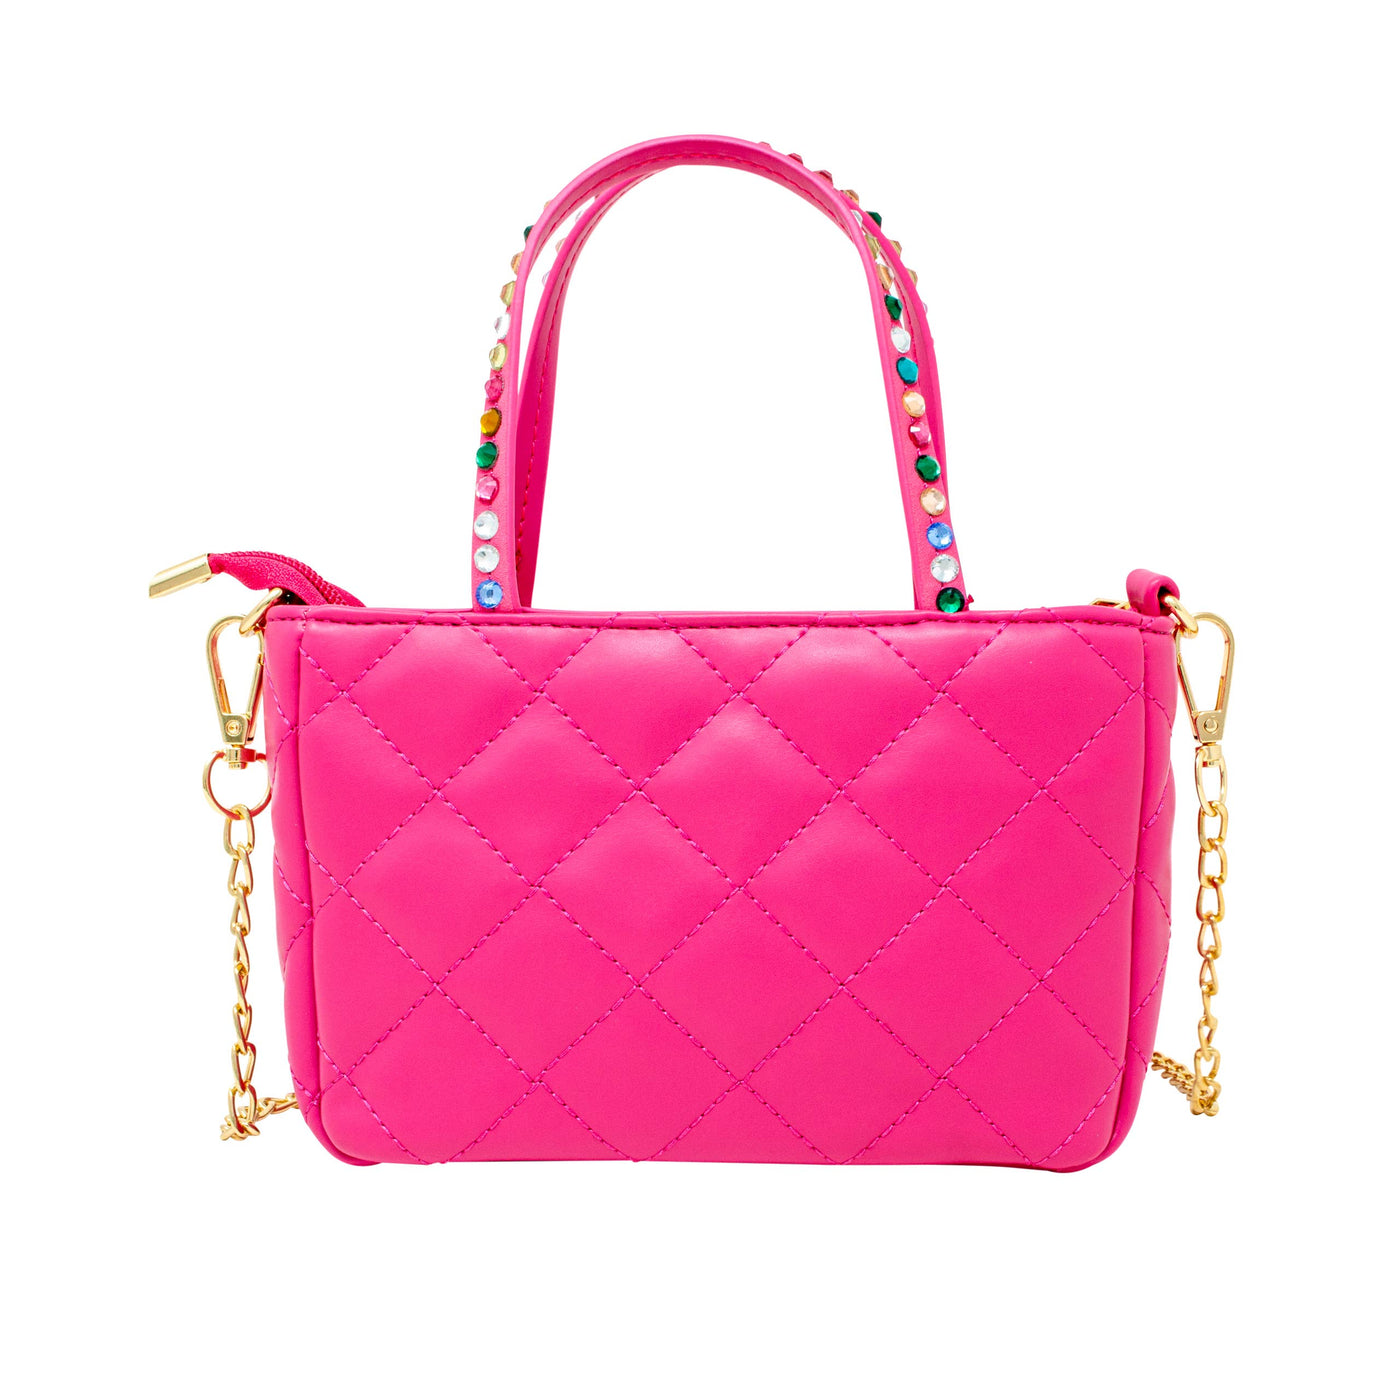 Quilted Rhinestone Tote Bag: Hot Pink